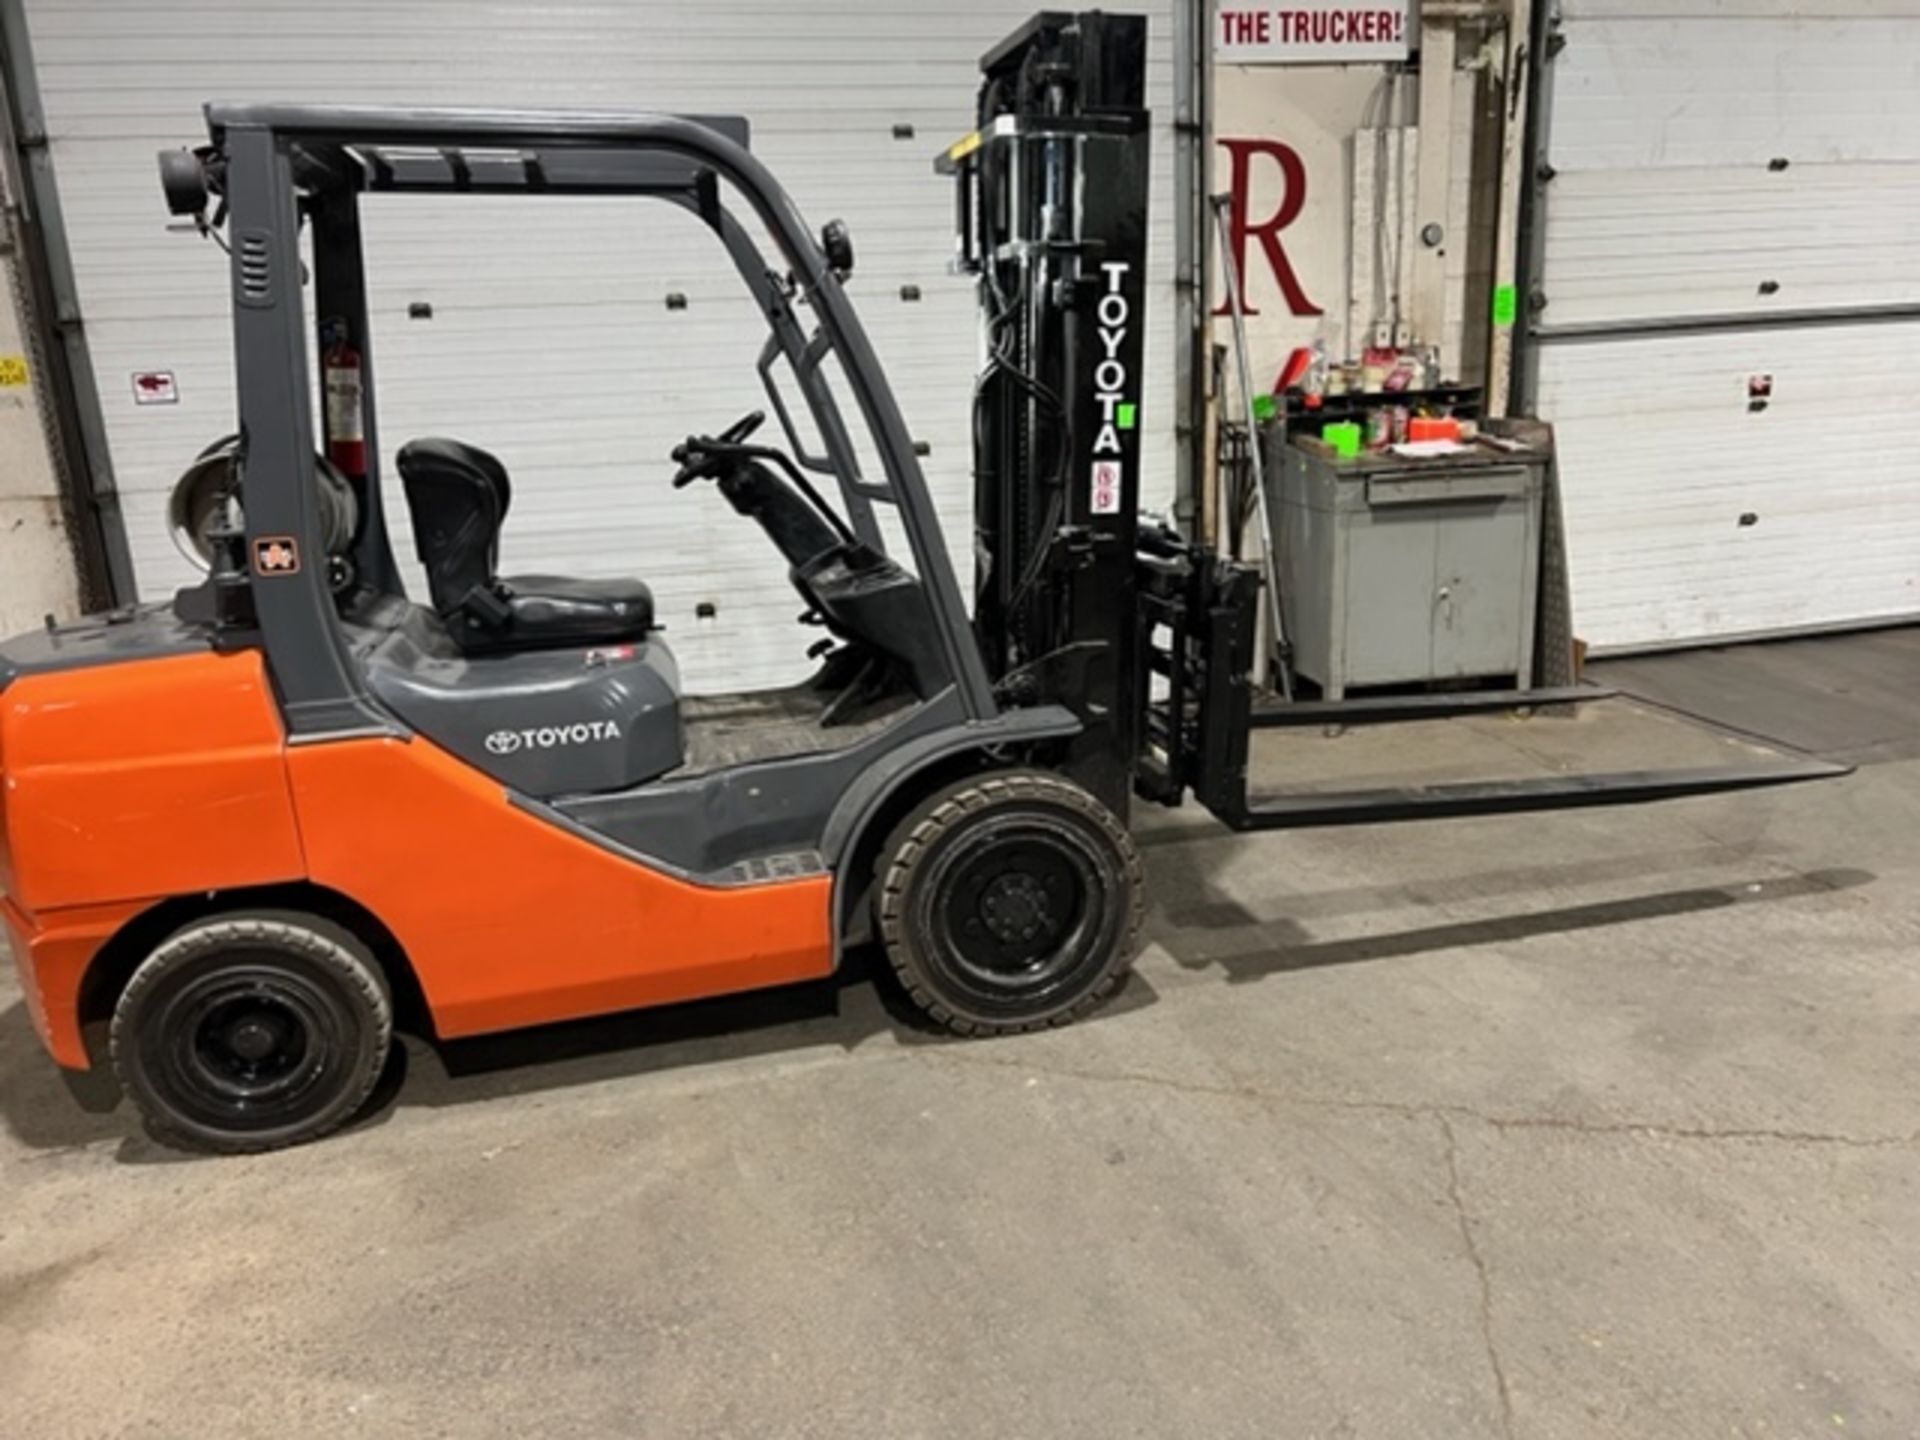 NICE Toyota 30 - 6,000lbs Capacity OUTDOOR Forklift LPG (propane) with NEW Sideshift Fork Positioner